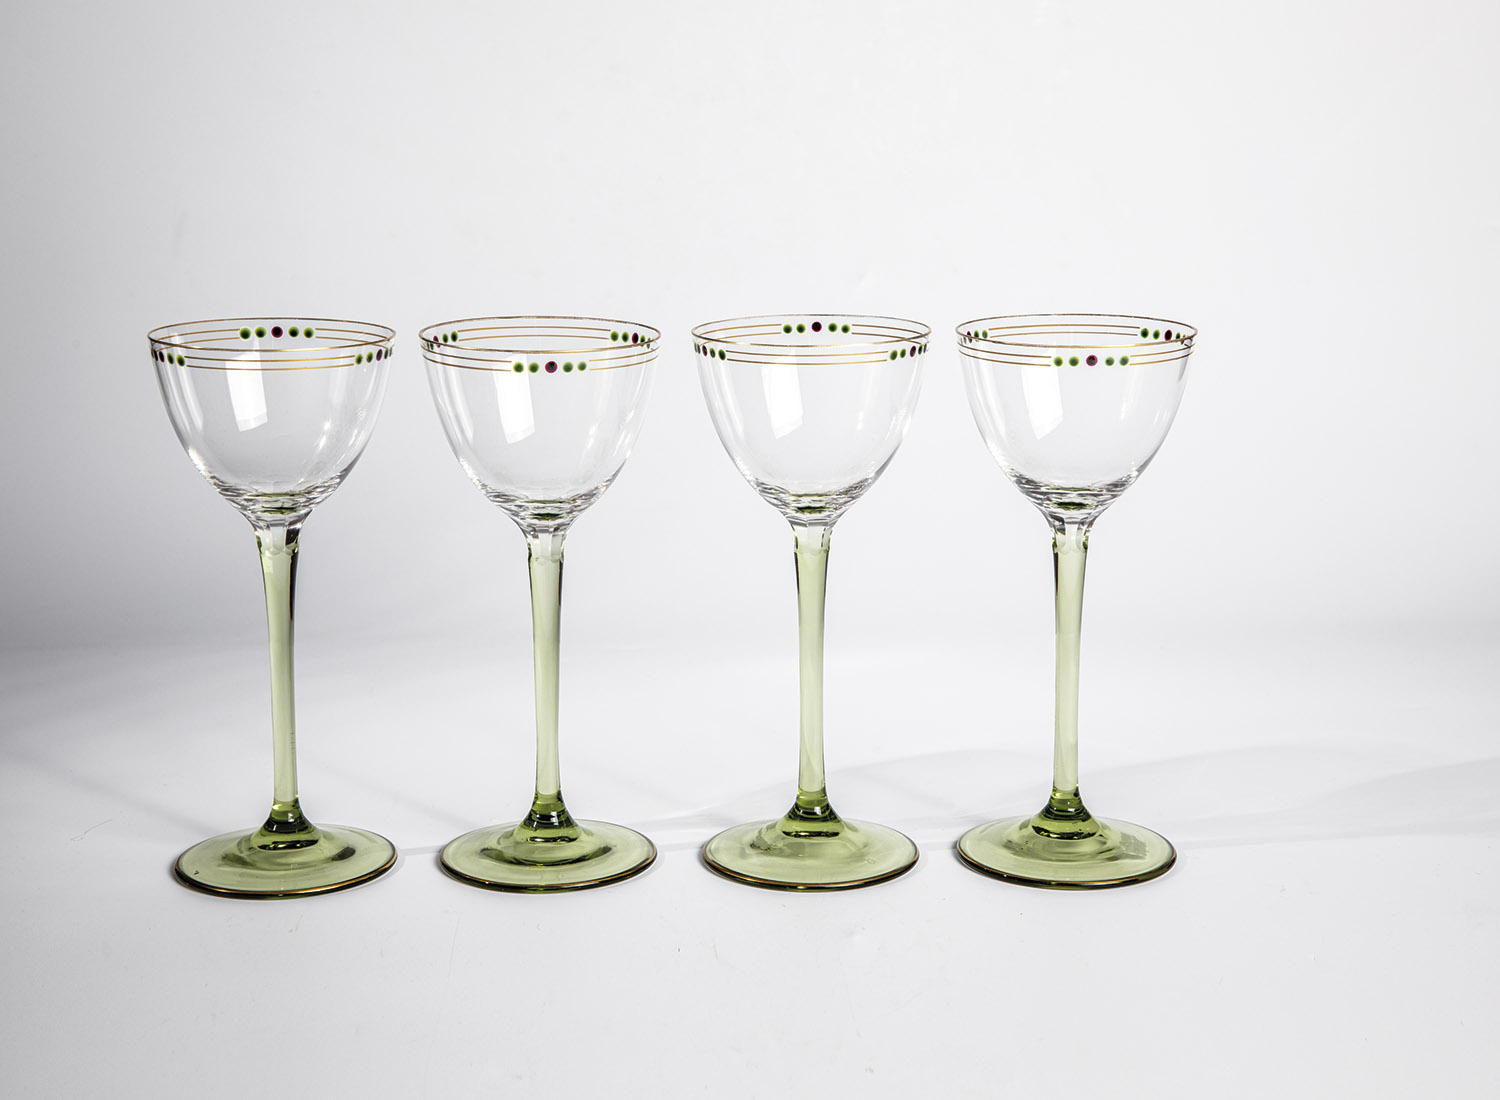 Four drinking glasses of Bohemia, circa 1910 feet and stems in green glass. Peel grind at the base